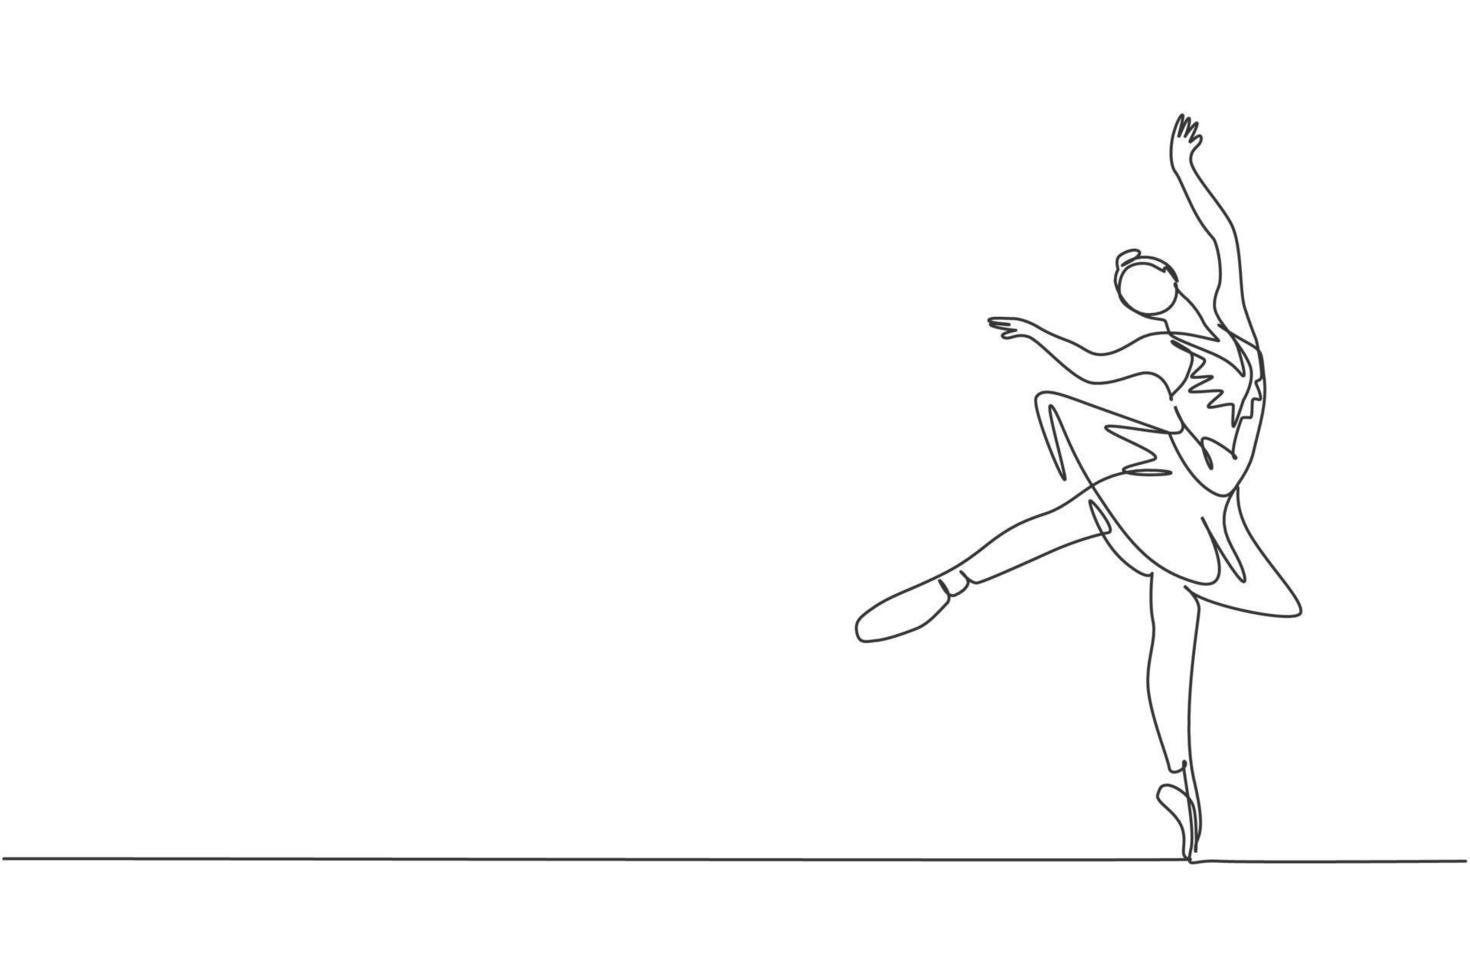 One continuous line drawing of young graceful woman ballet dancer perform beauty classic dance at stage of opera house. Ballet performance concept. Dynamic single line draw design vector illustration